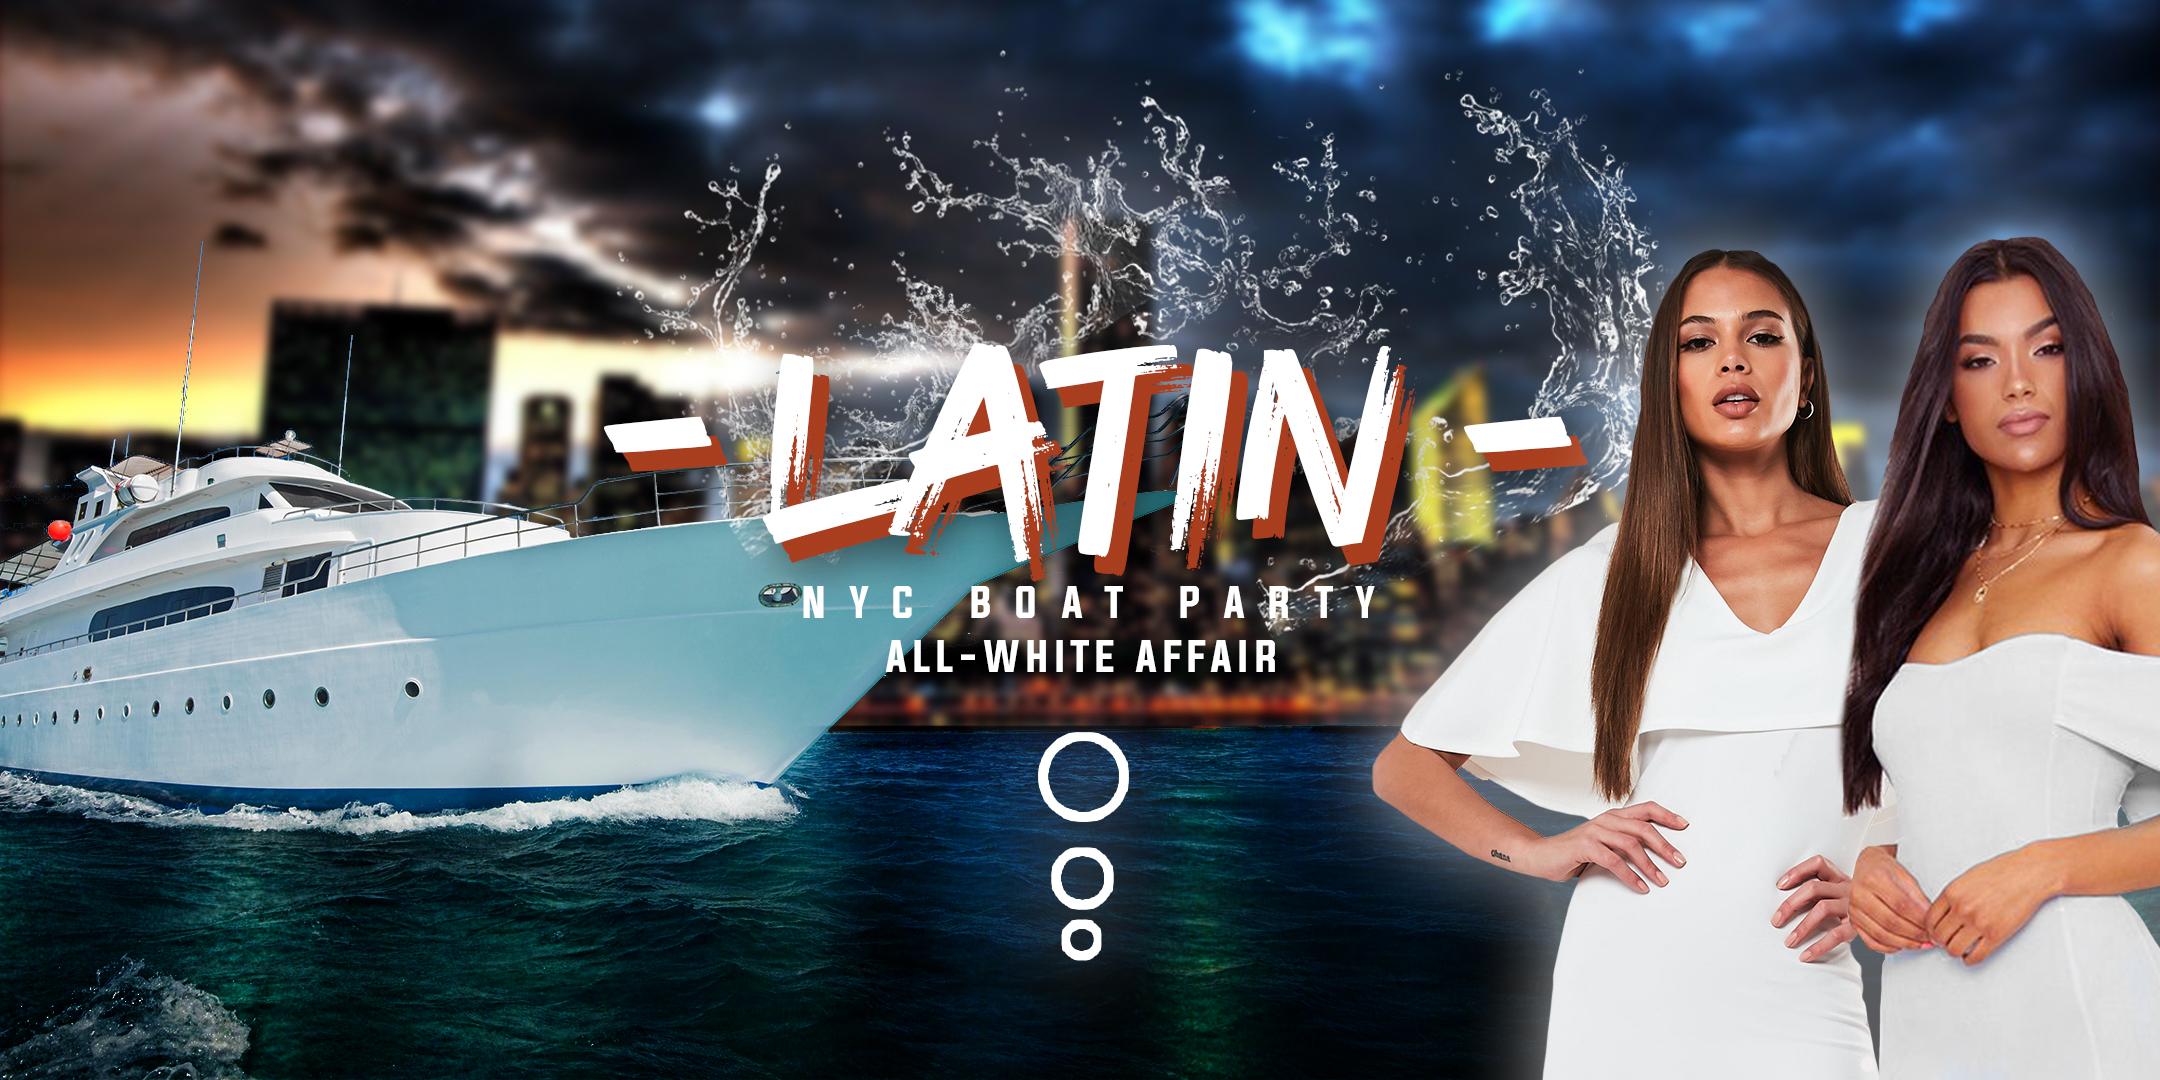 All White Latin Sunset Boat Party - Midtown Yacht Cruise NYC Skyline - Friday Fiesta